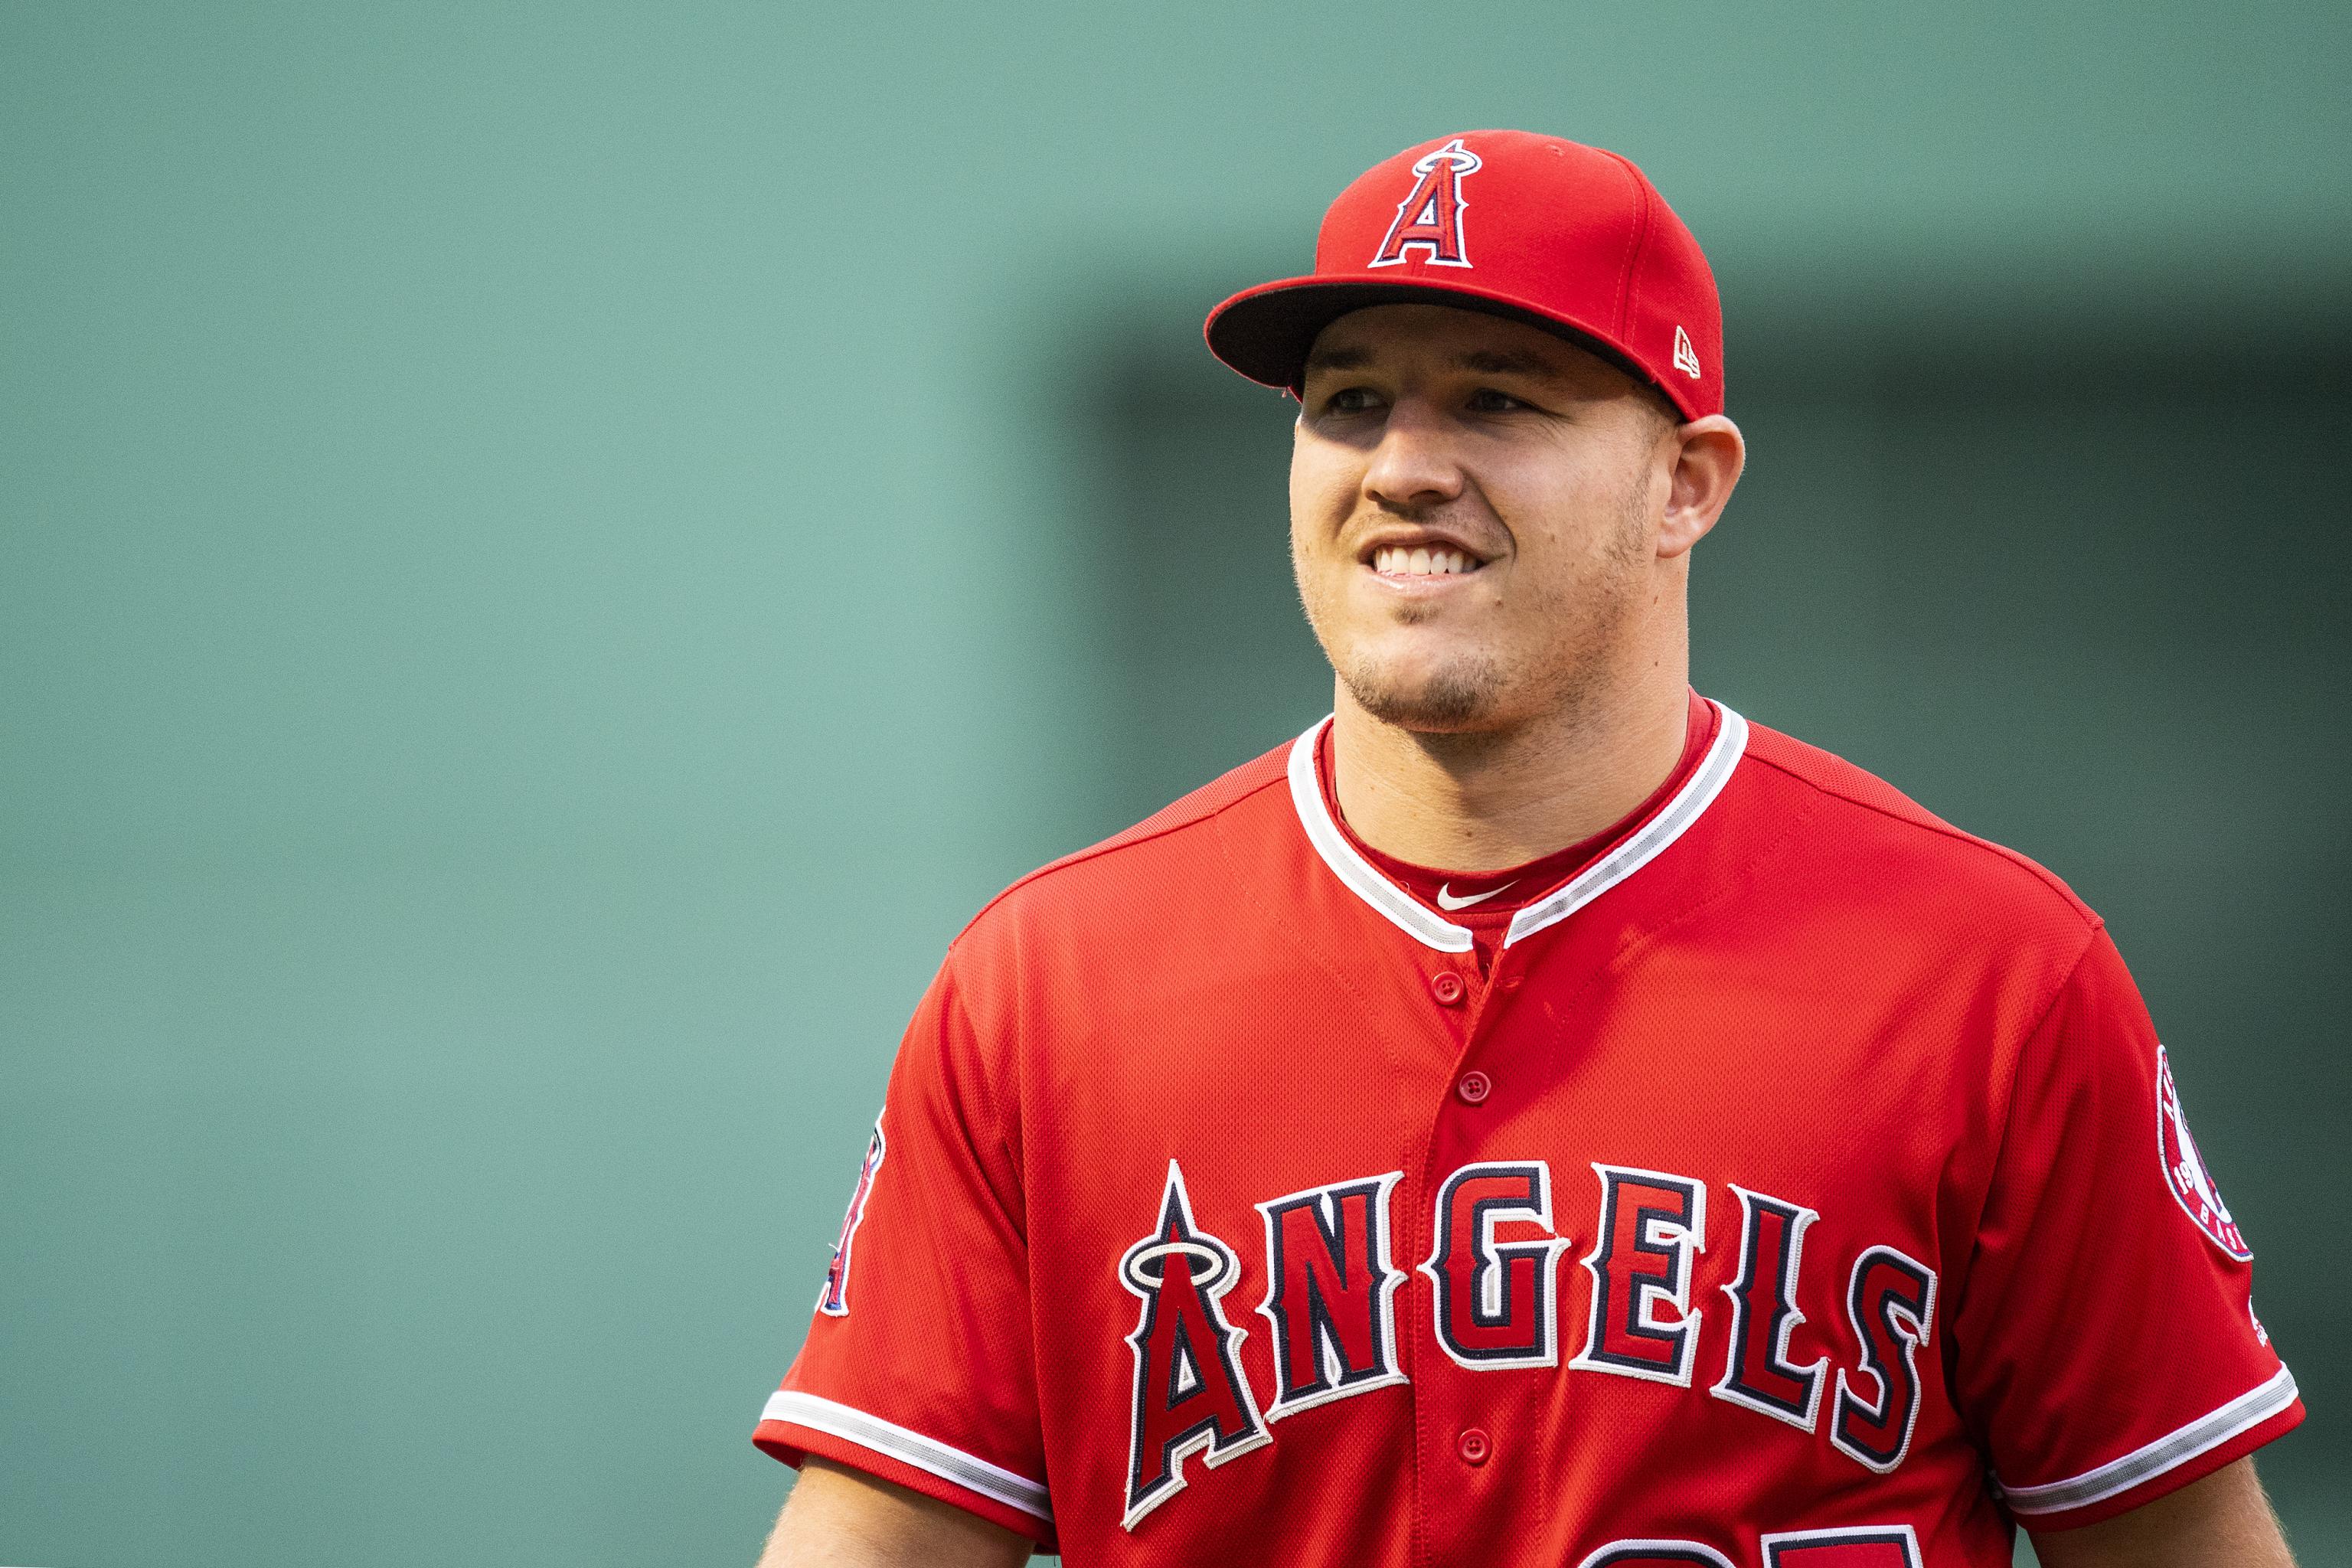 MLB's Top Annual Salaries After Mike Trout's Reported $430M